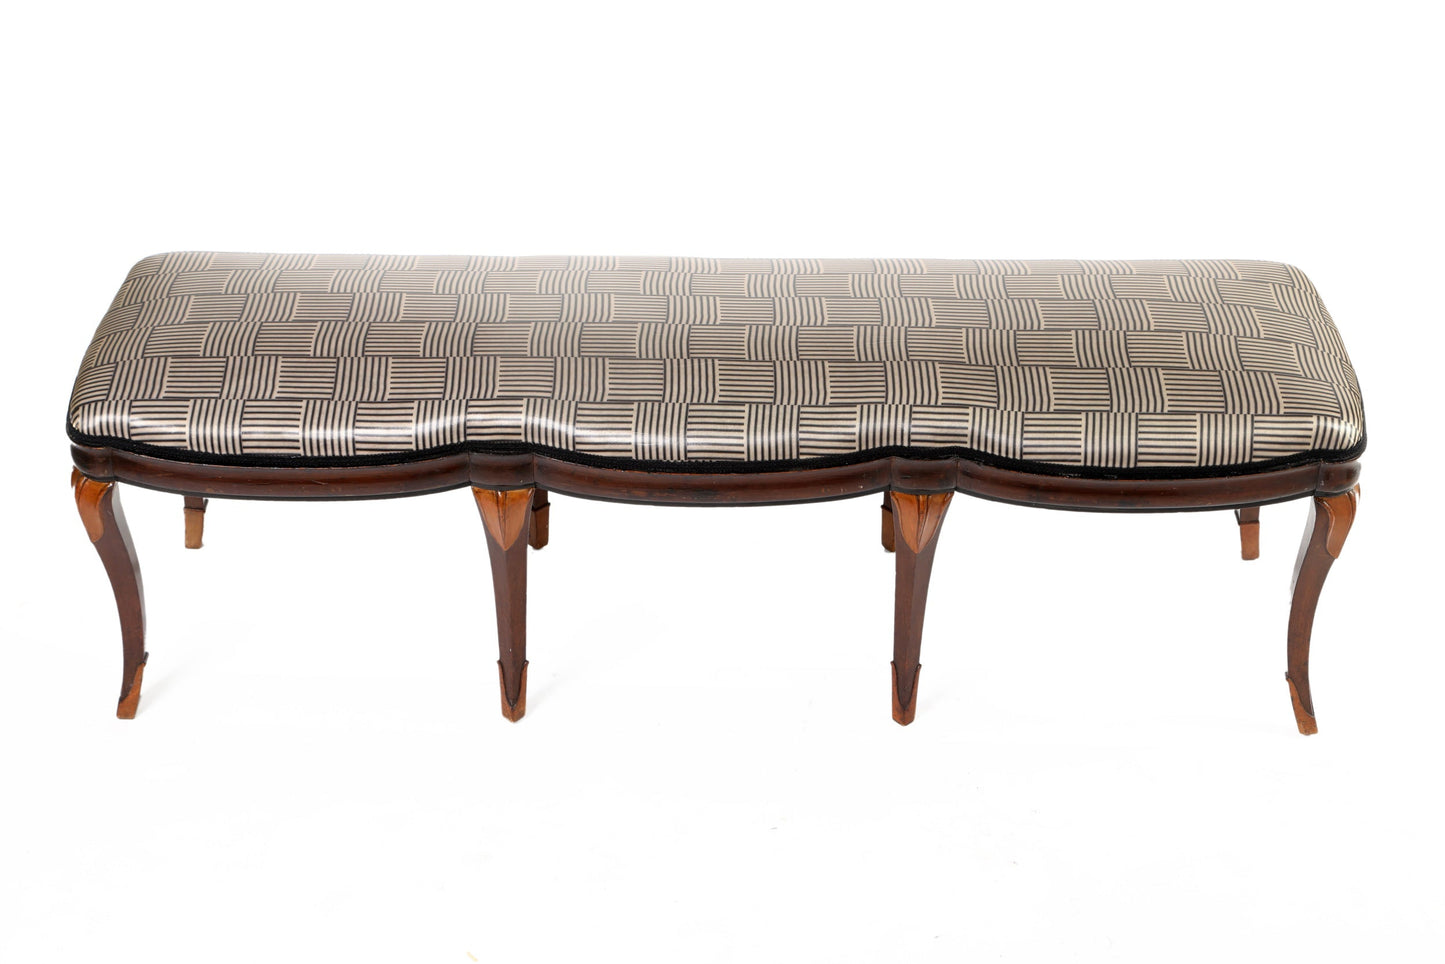 Paolo Buffa bench from the 50s reinterpreted triplef